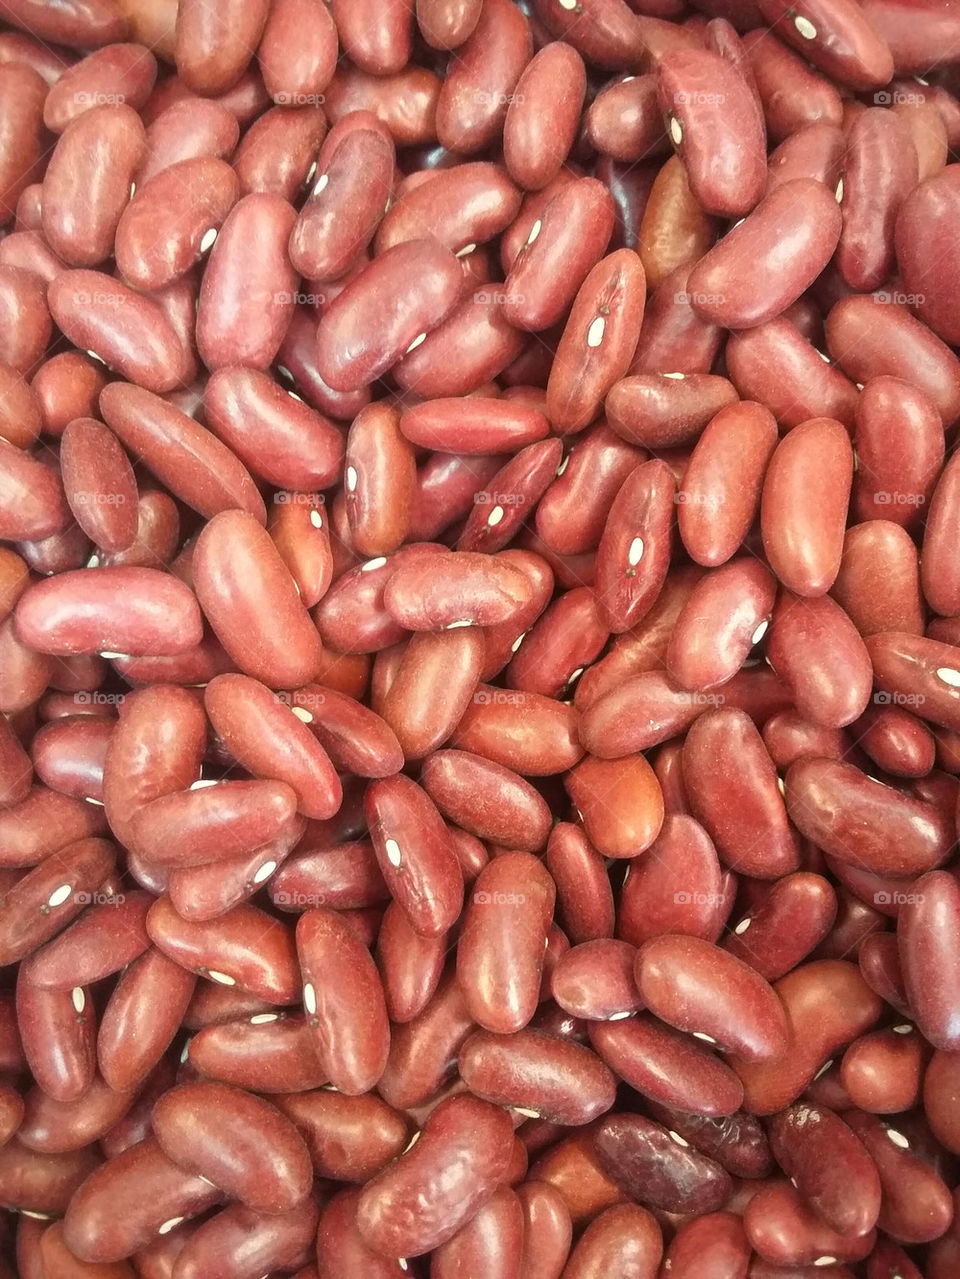 red beans